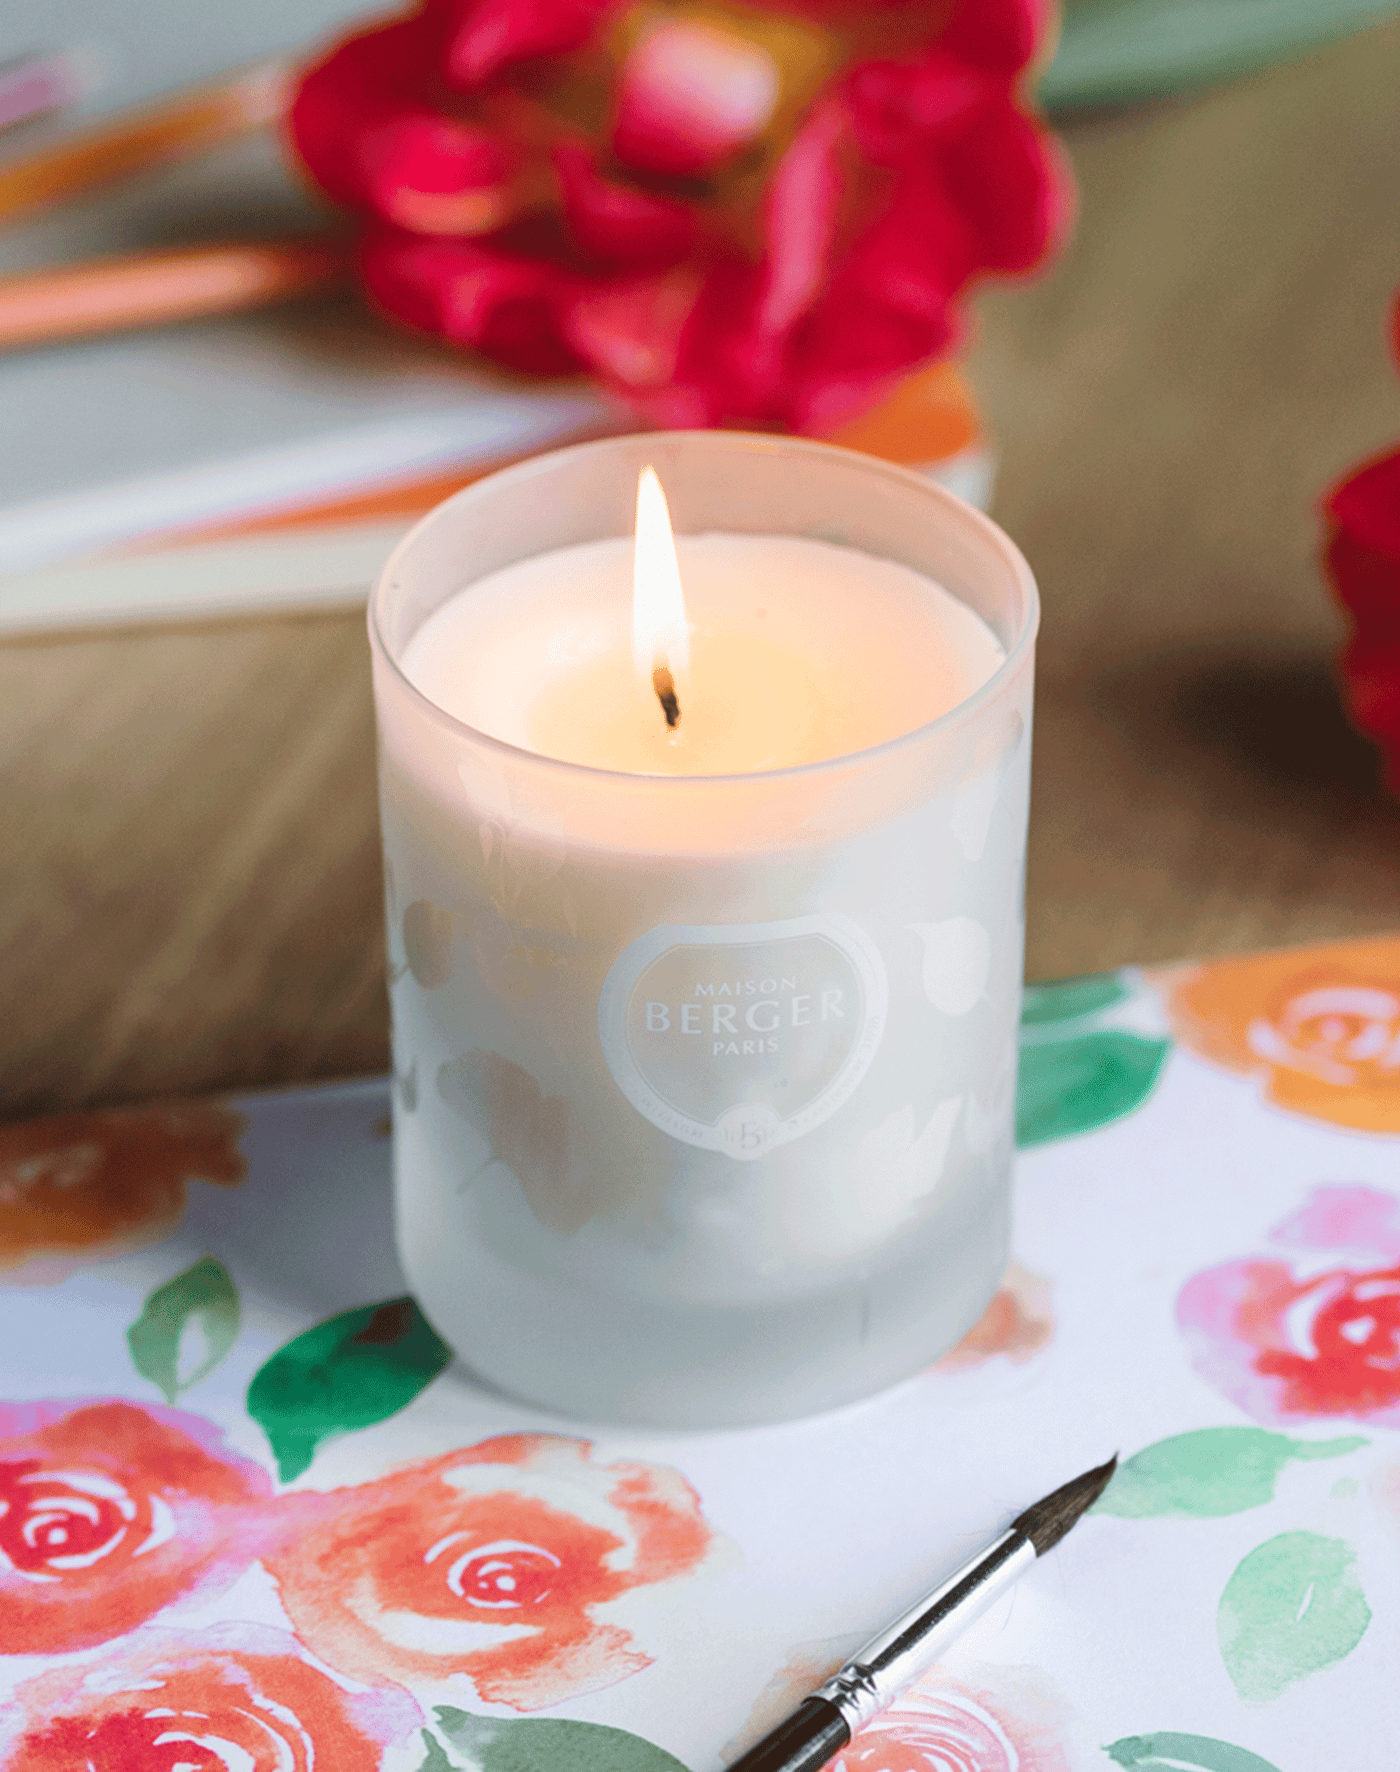 Aroma Wake-Up Scented Candle